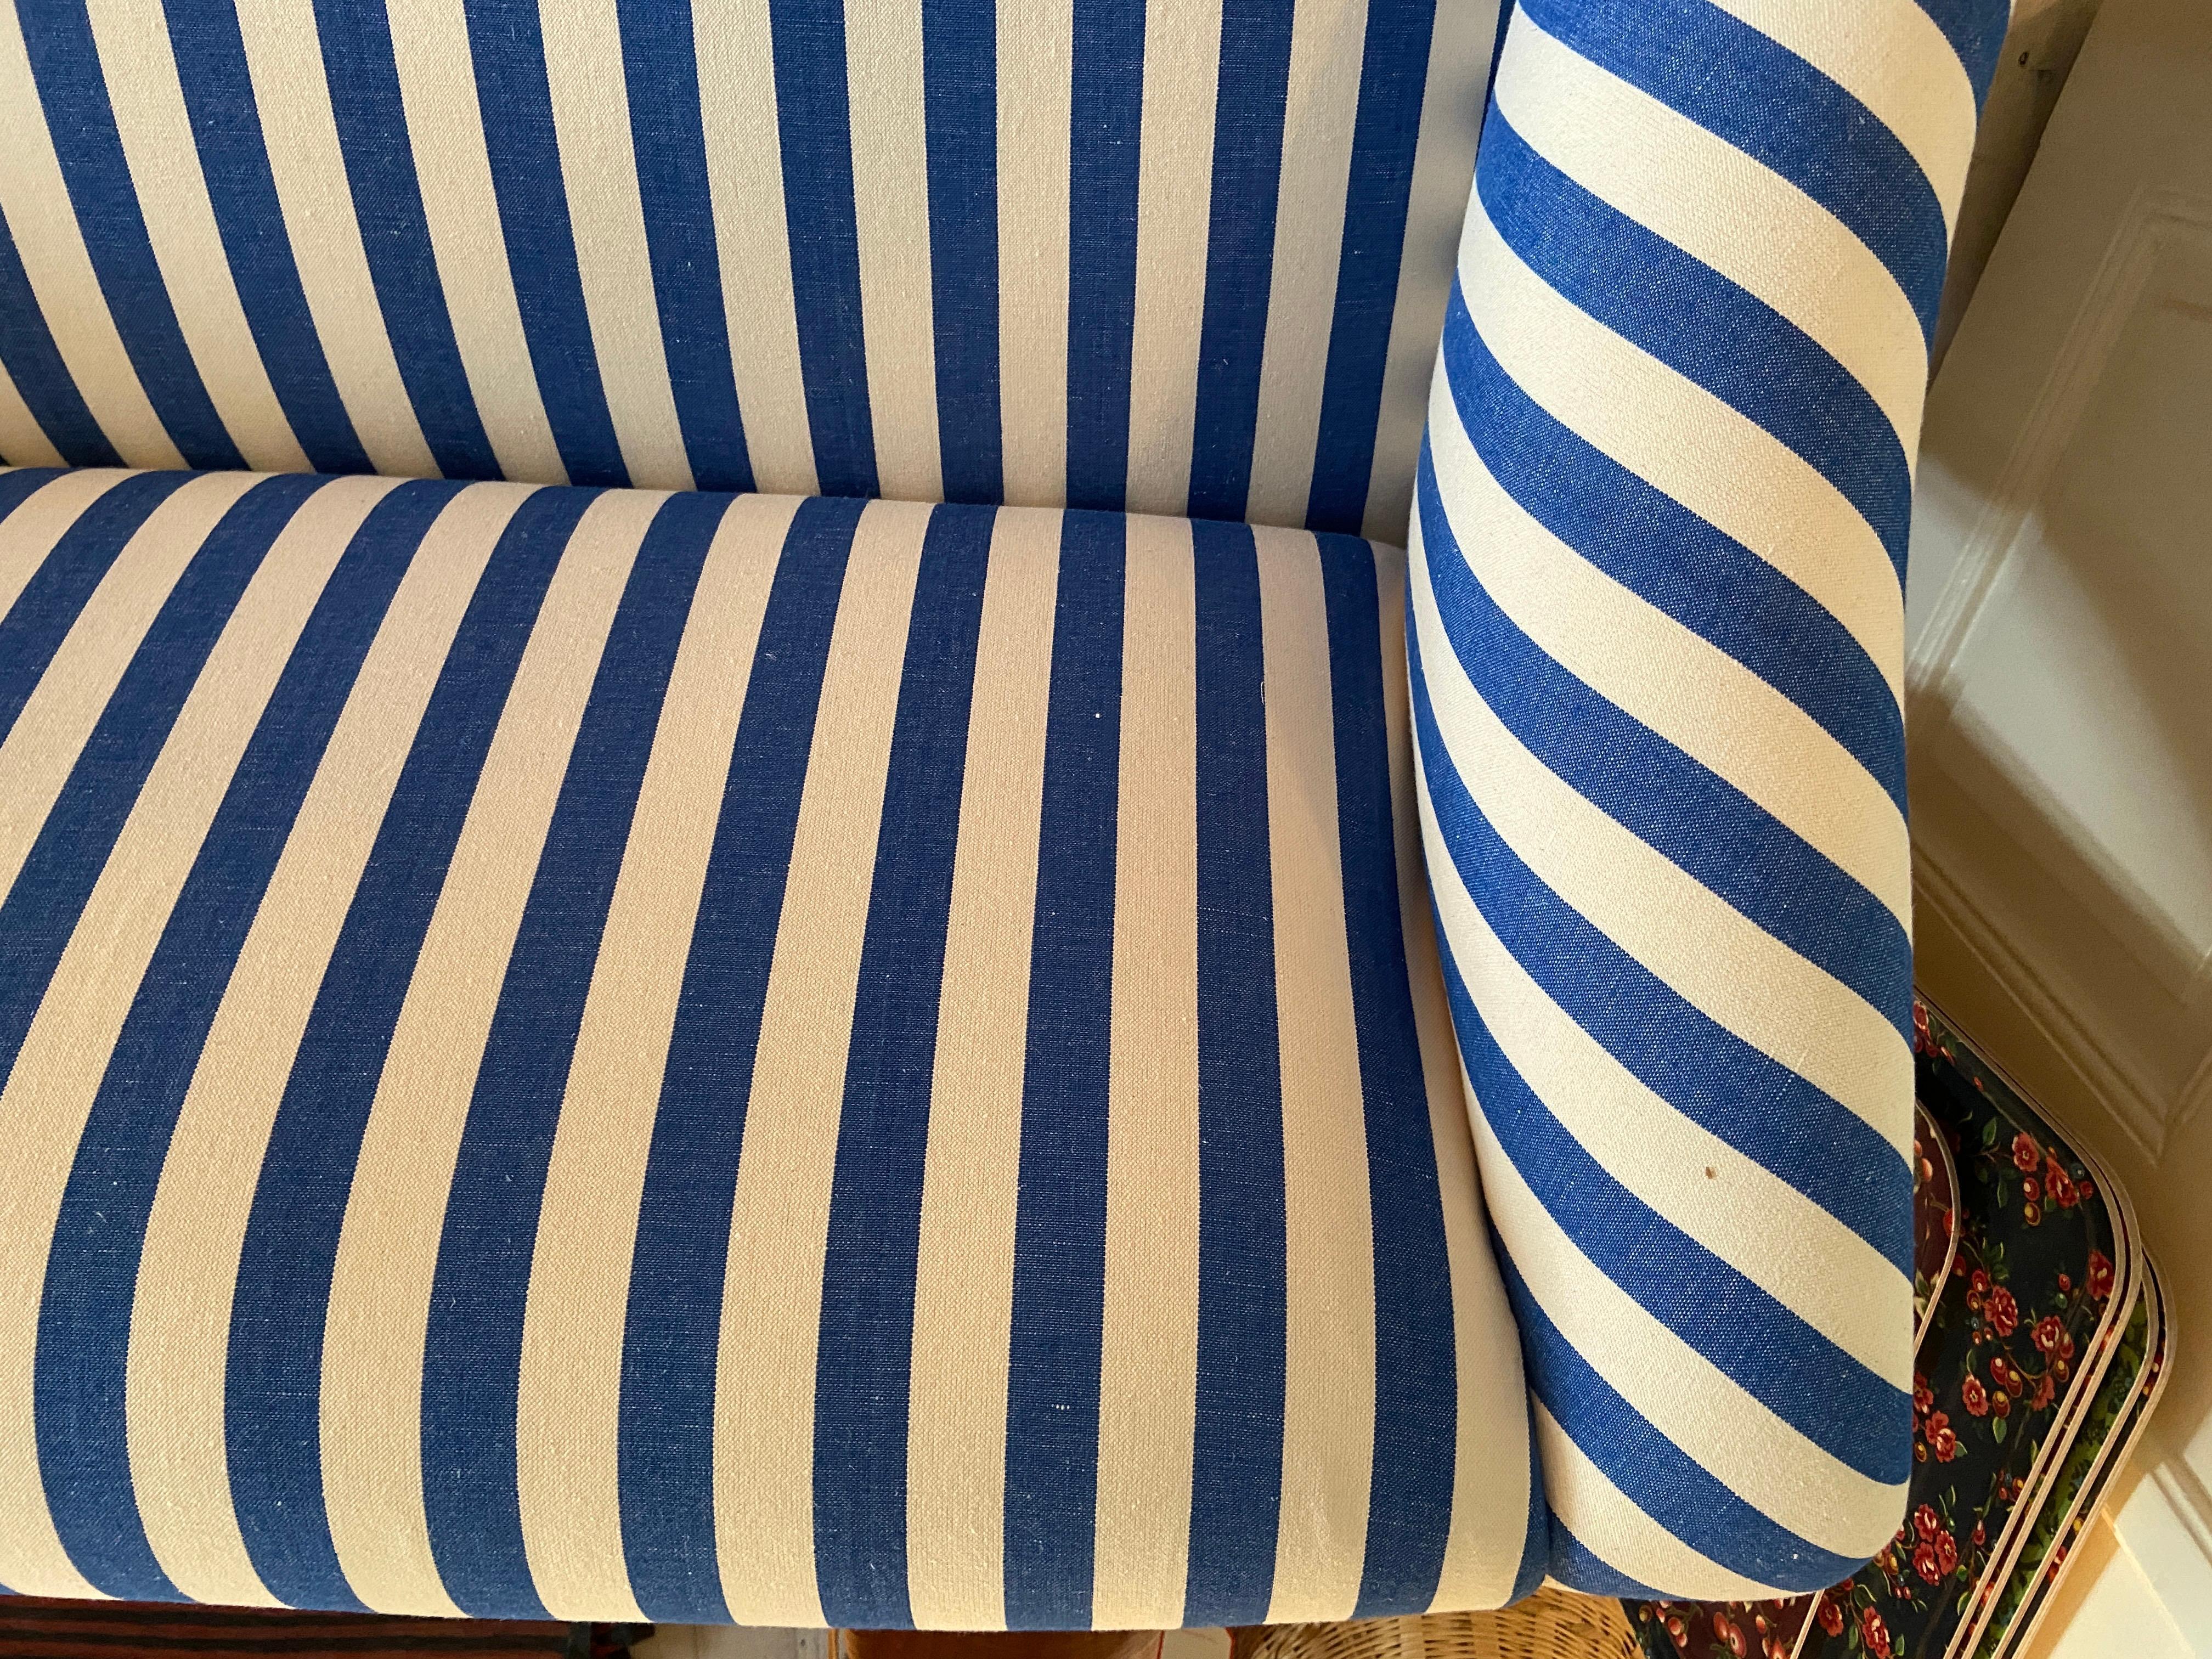 Textile Contemporary Sofa in Customized Blue Striped Upholstery, Belgium, 2020s For Sale